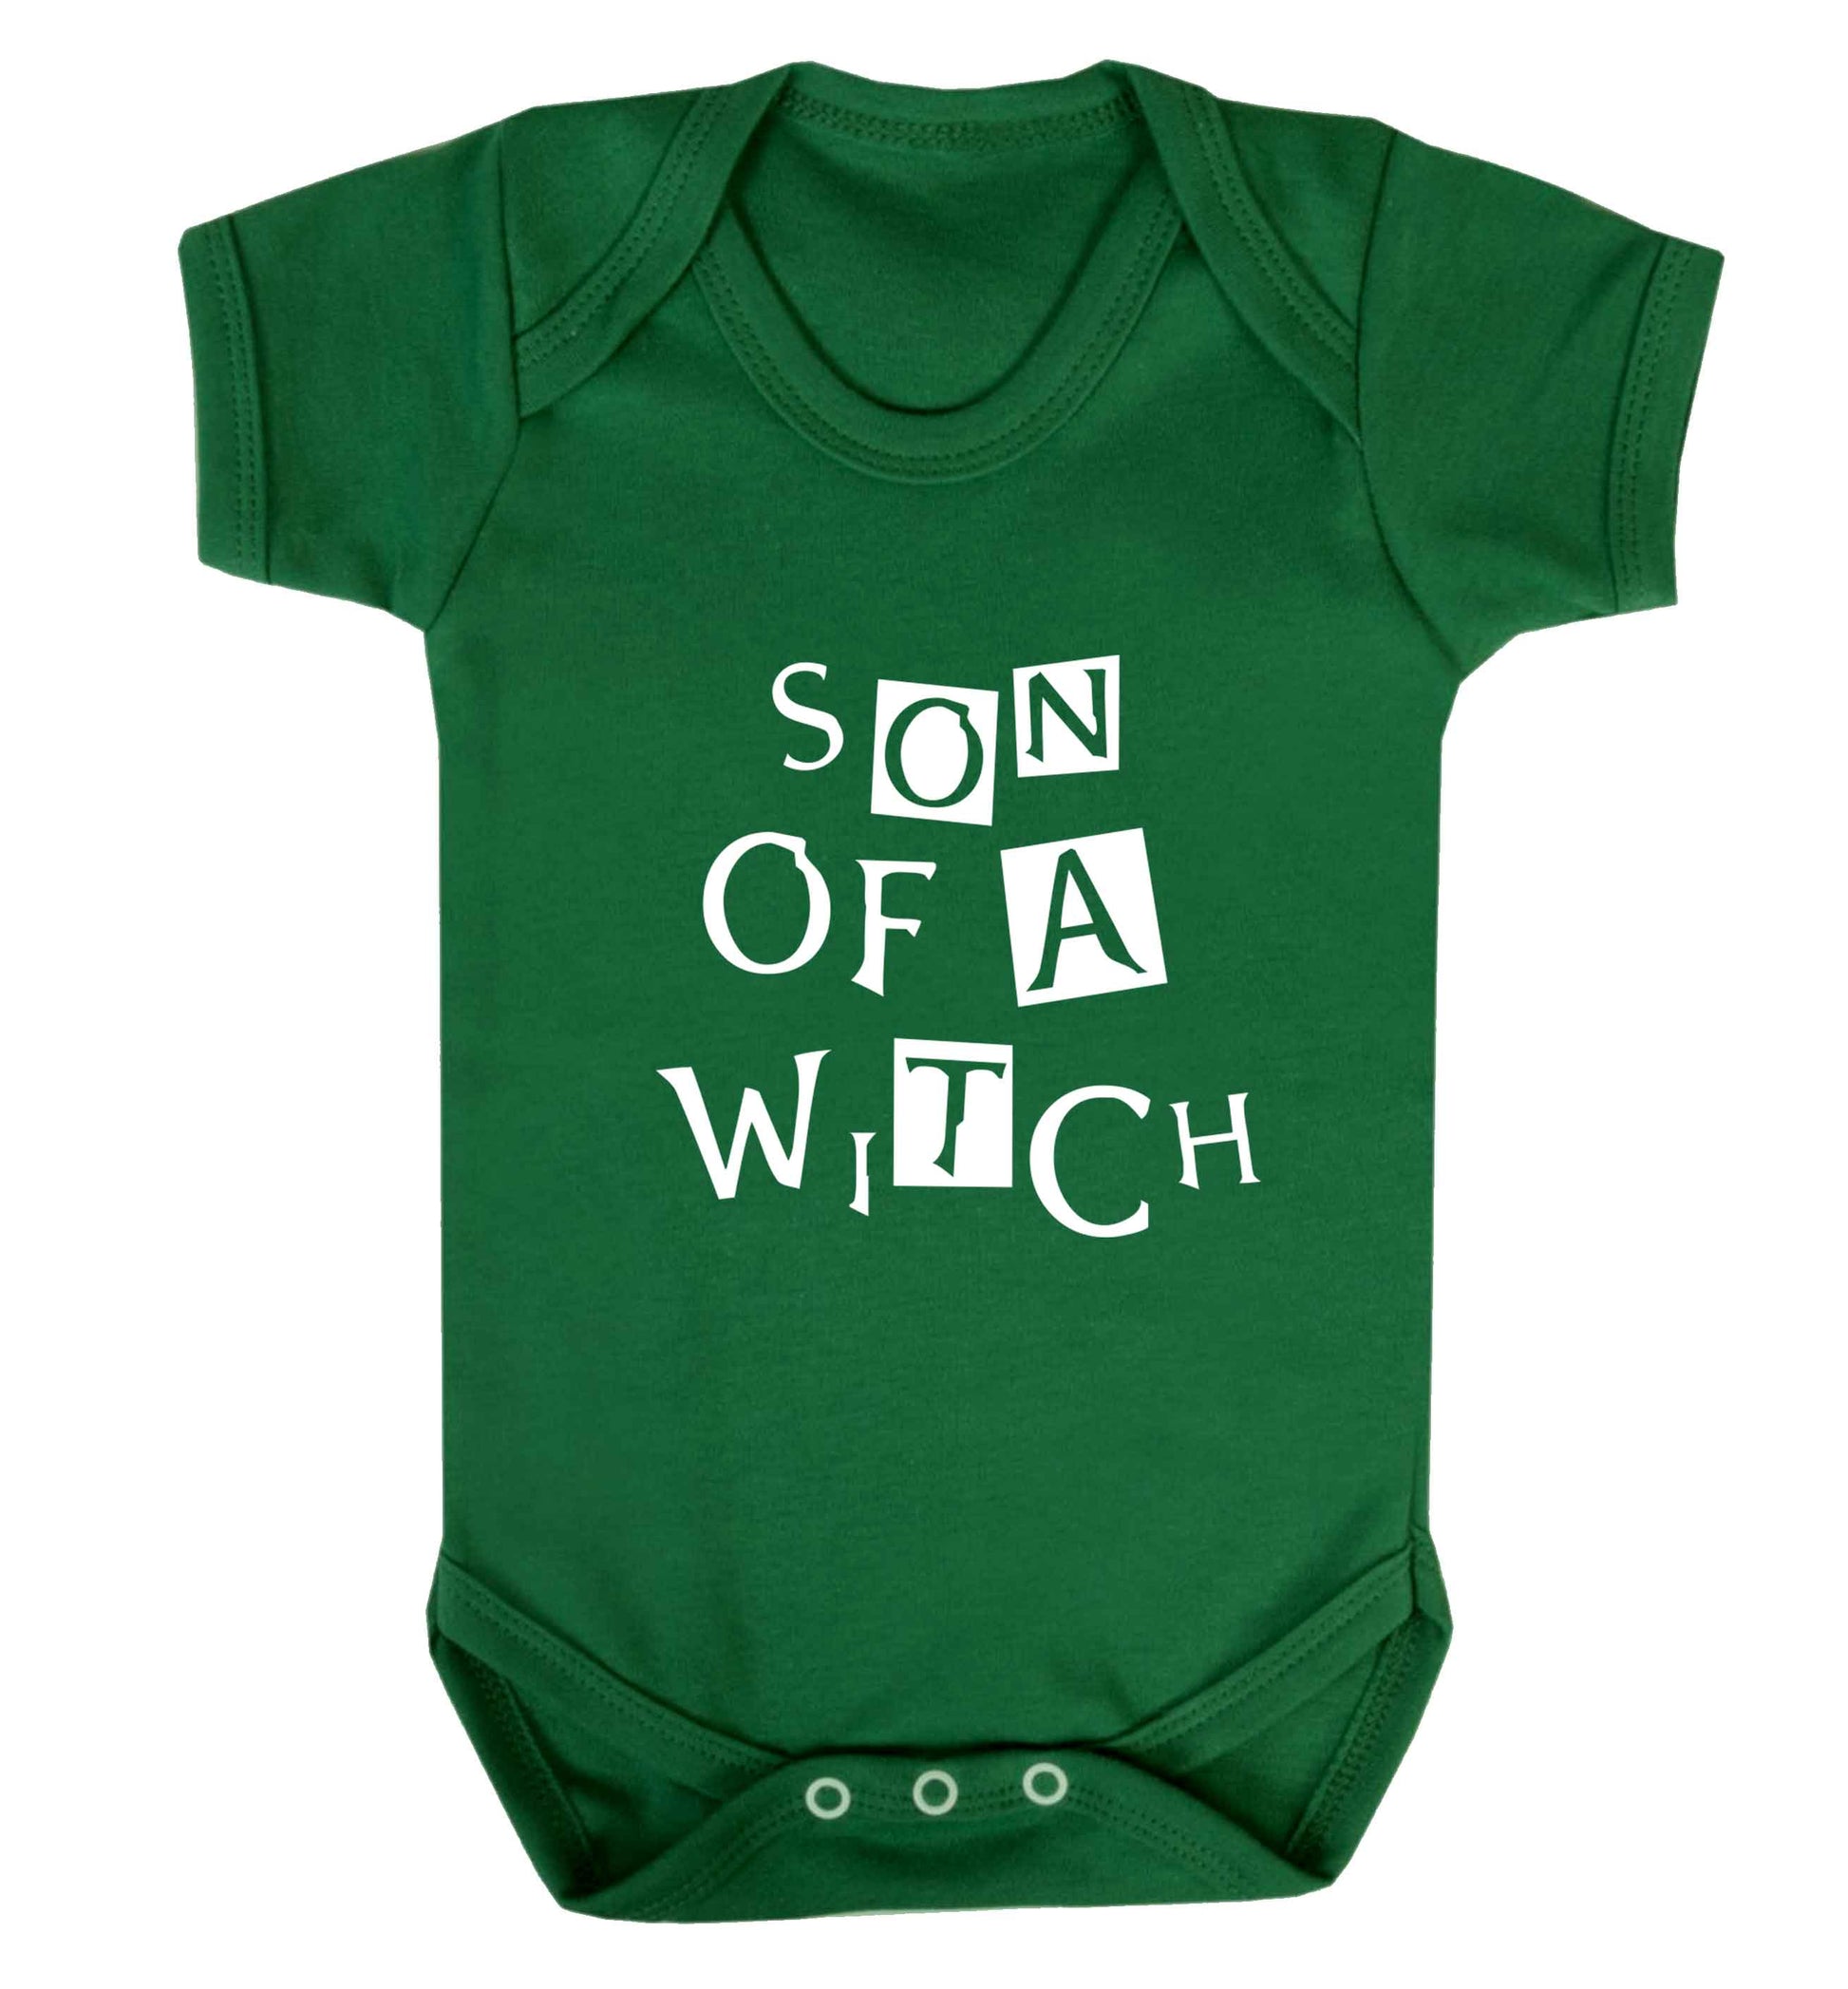 Son of a witch baby vest green 18-24 months